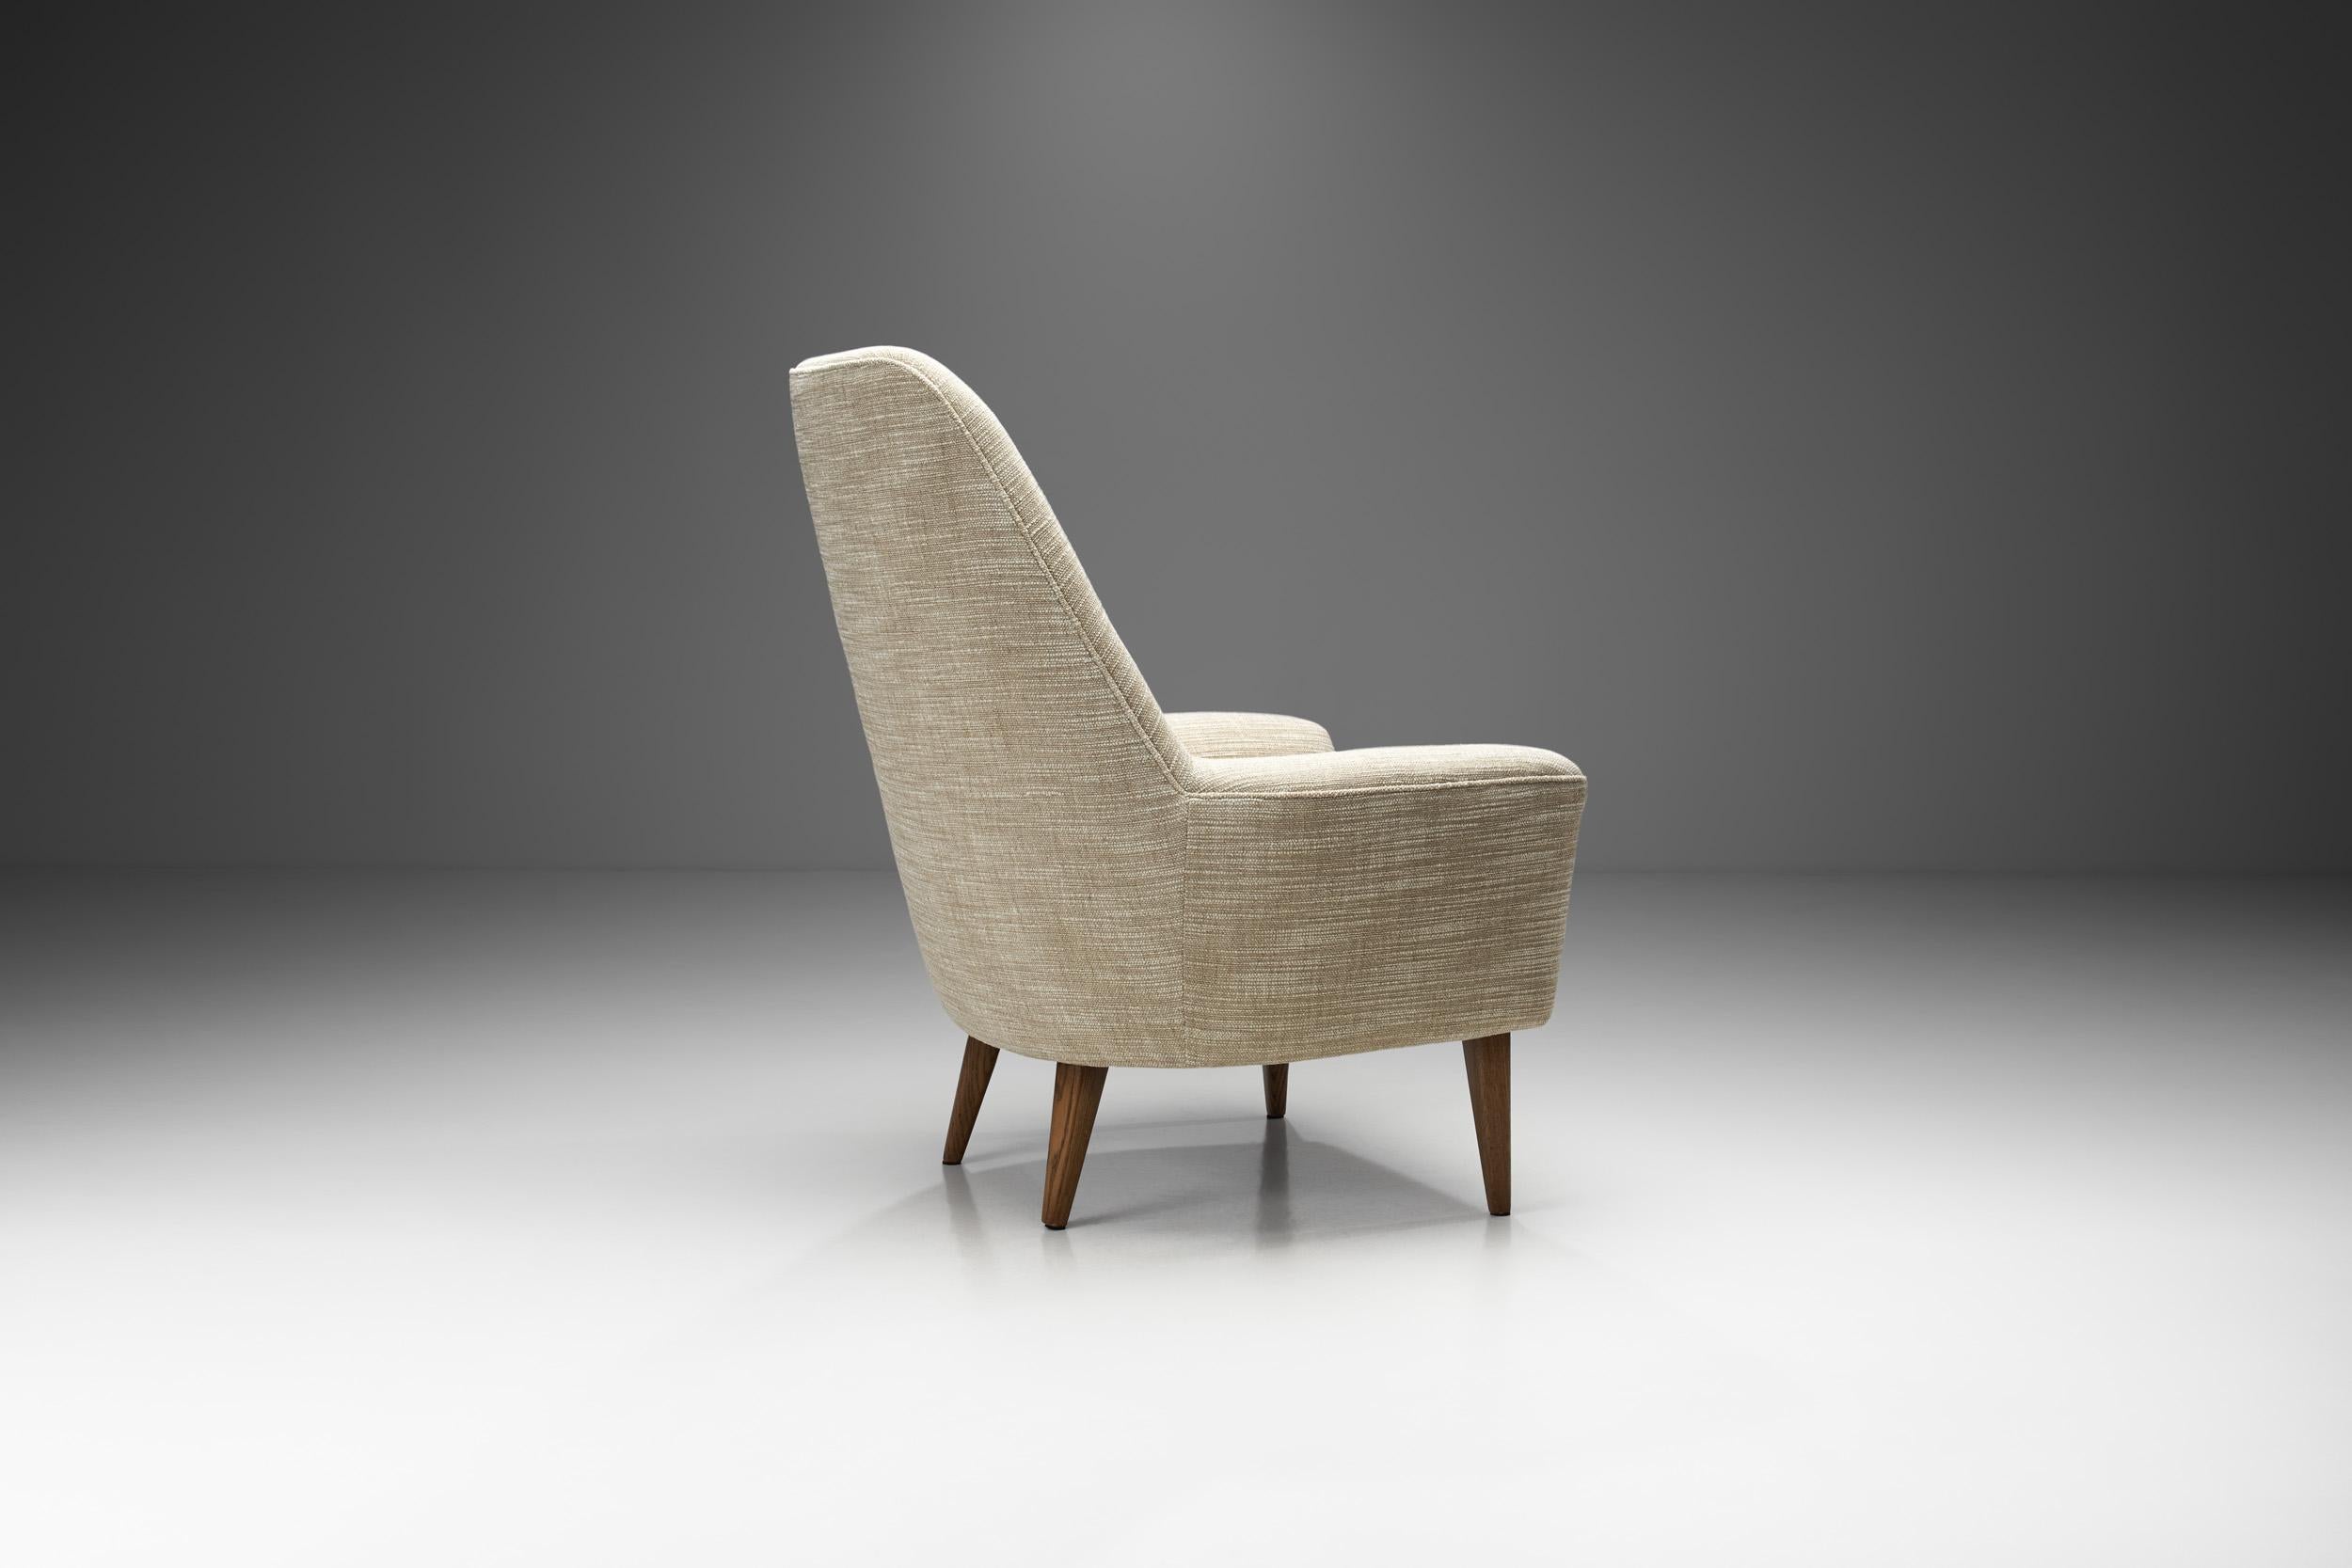 Mid-20th Century Swedish Modern Armchair with Tapered Wooden Legs, Sweden, 1950s For Sale